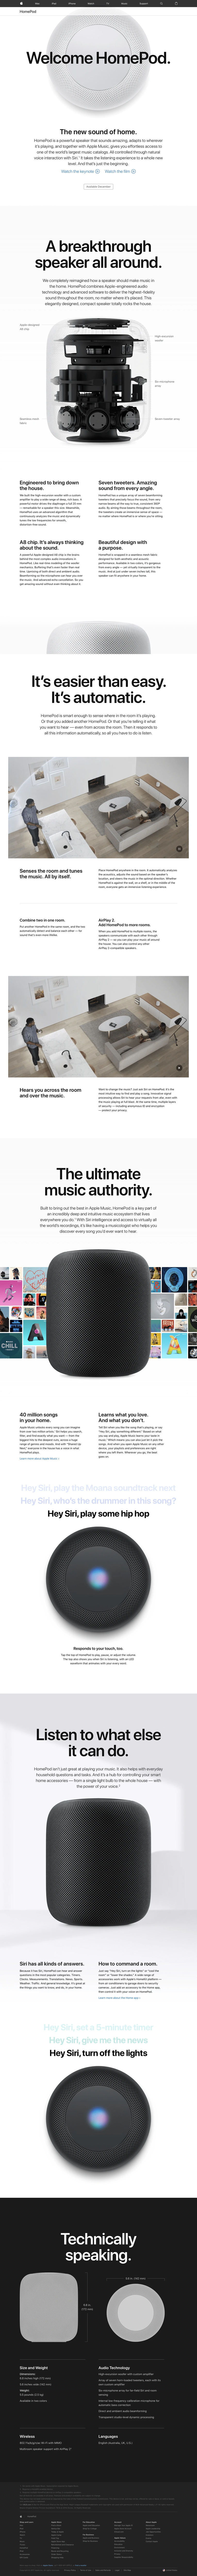 HomePod Landing Page Example: With amazing sound, automatic room sensing, and the vast Apple Music library, HomePod takes the speaker to a whole new level.